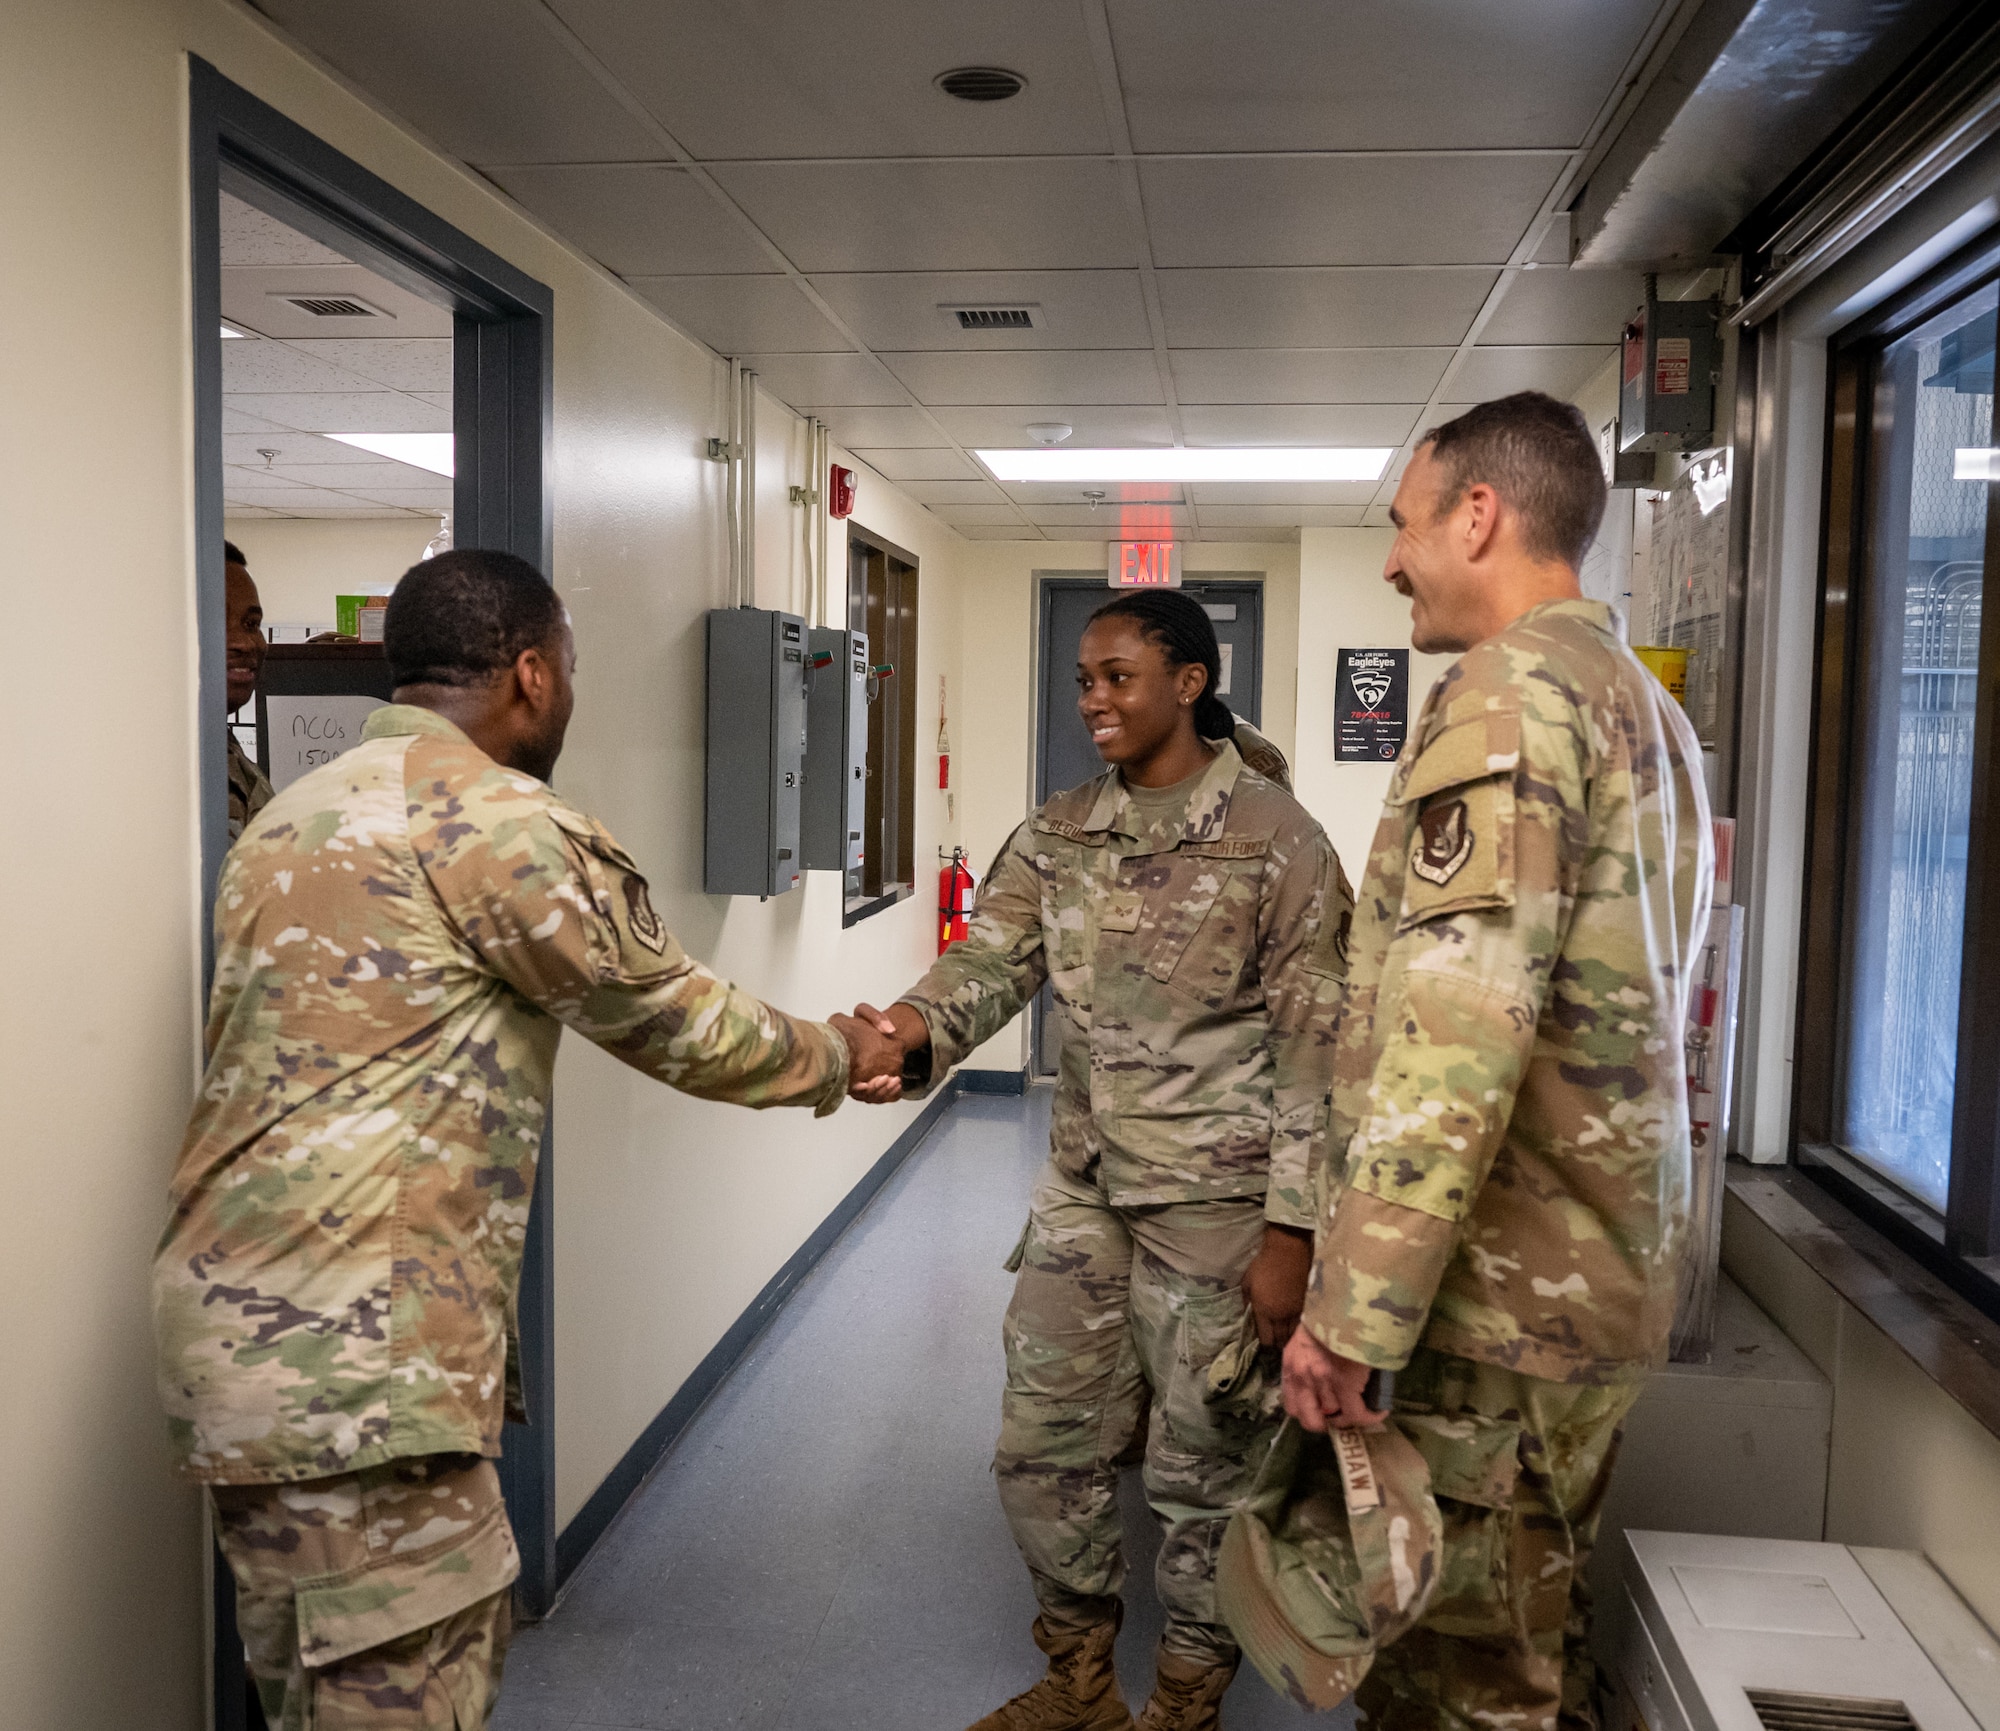 U.S. Air Force Capt. Mark Bradshaw, 51st Fighter Wing chaplain, and Senior Airman Jasmine Blount, 51st FW religious affairs Airman, greet members from the 51st Civil Engineer Squadron during a unit engagement event at Osan Air Base, Republic of Korea, Sept. 6, 2023.